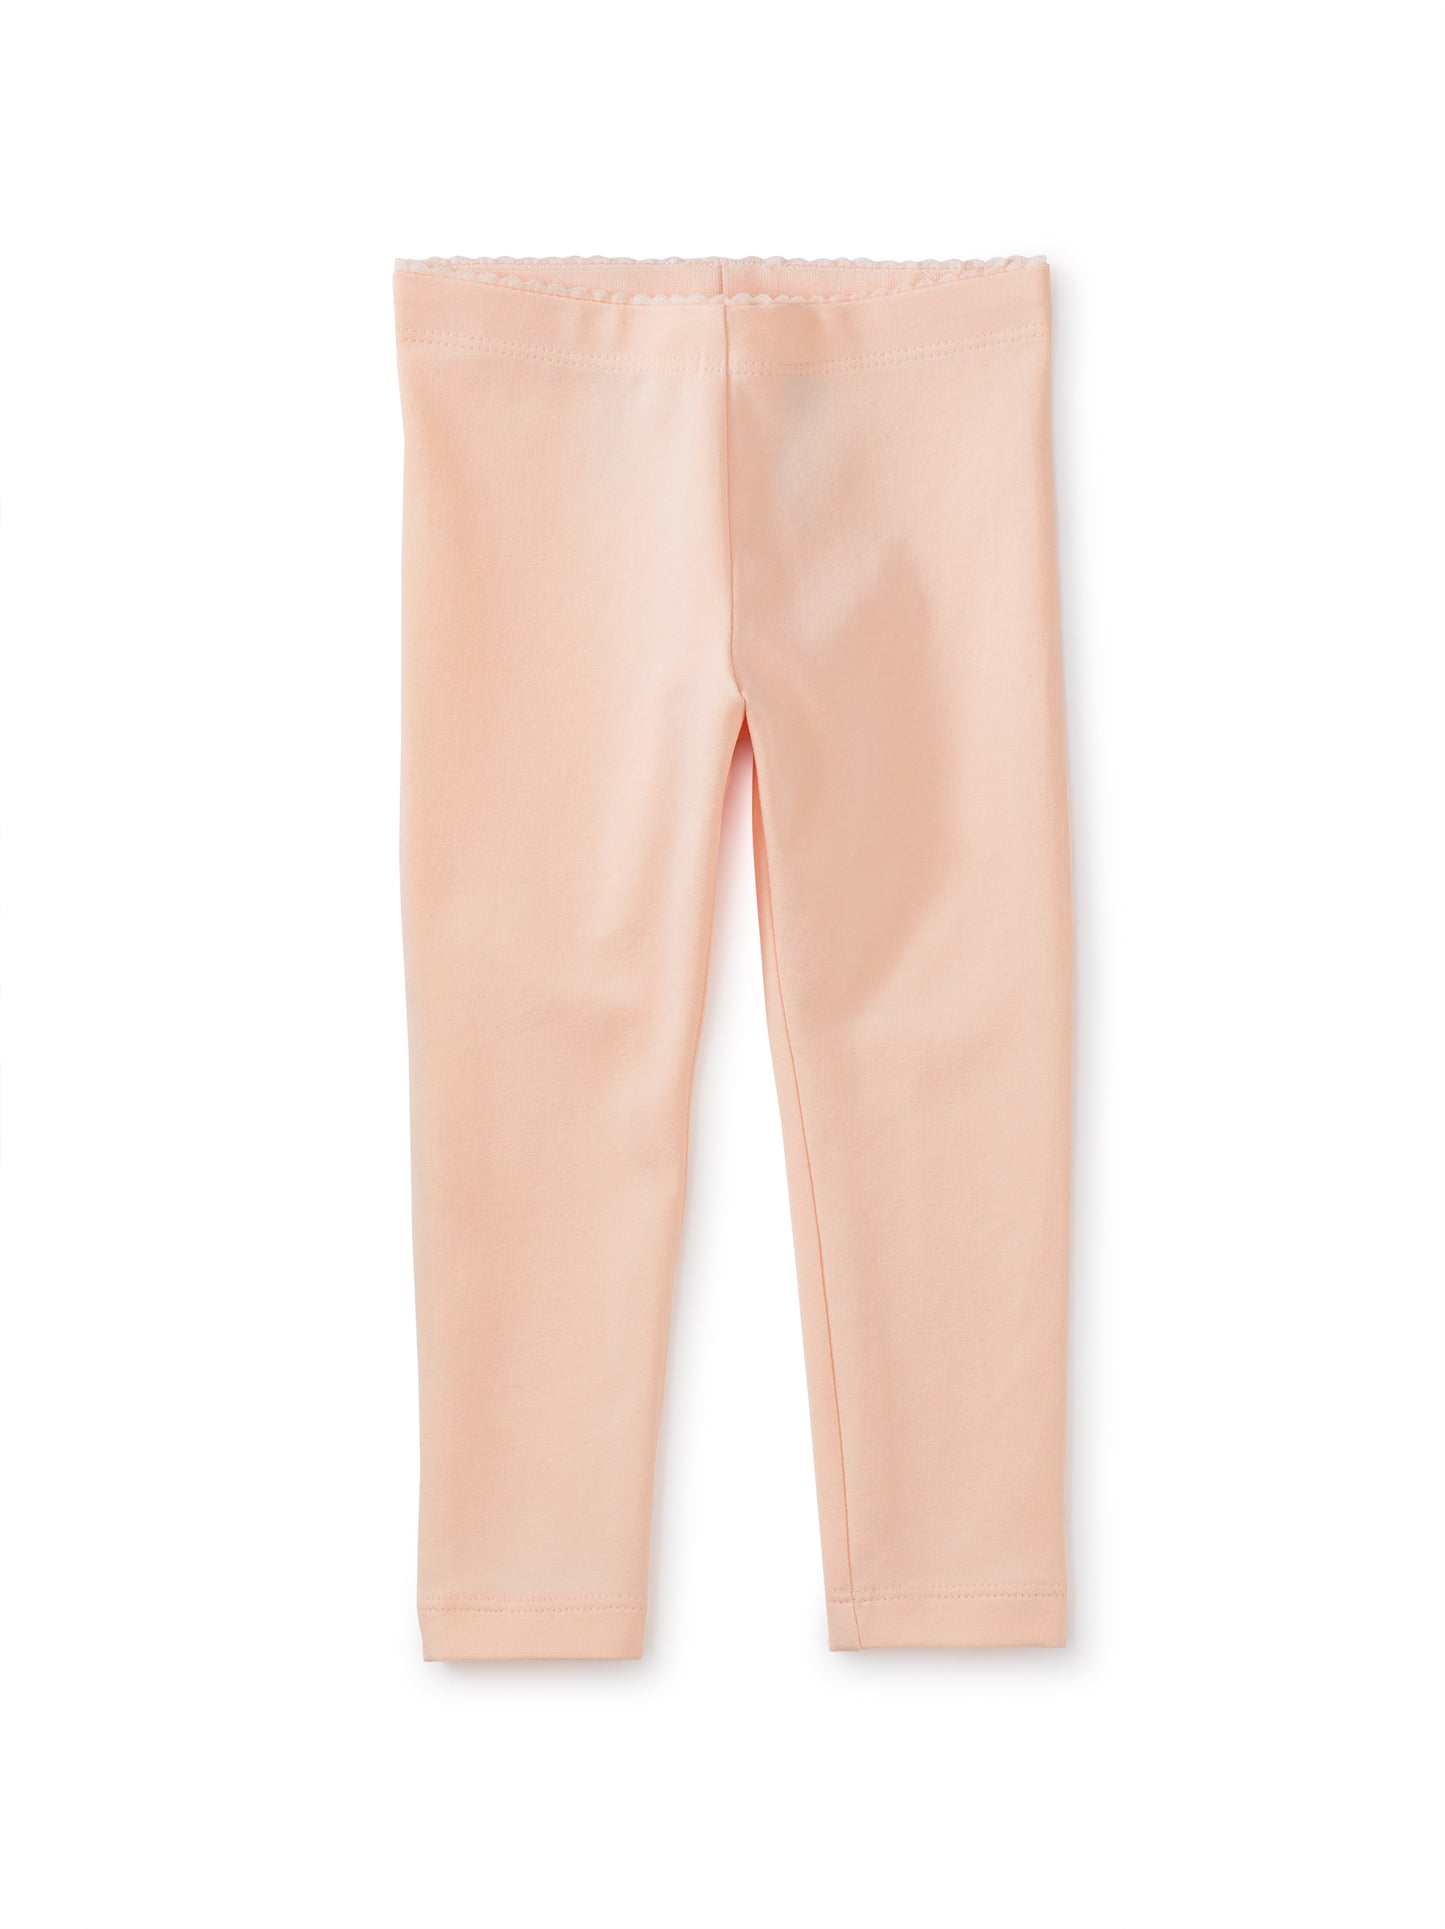 Creole Pink Solid Baby Leggings